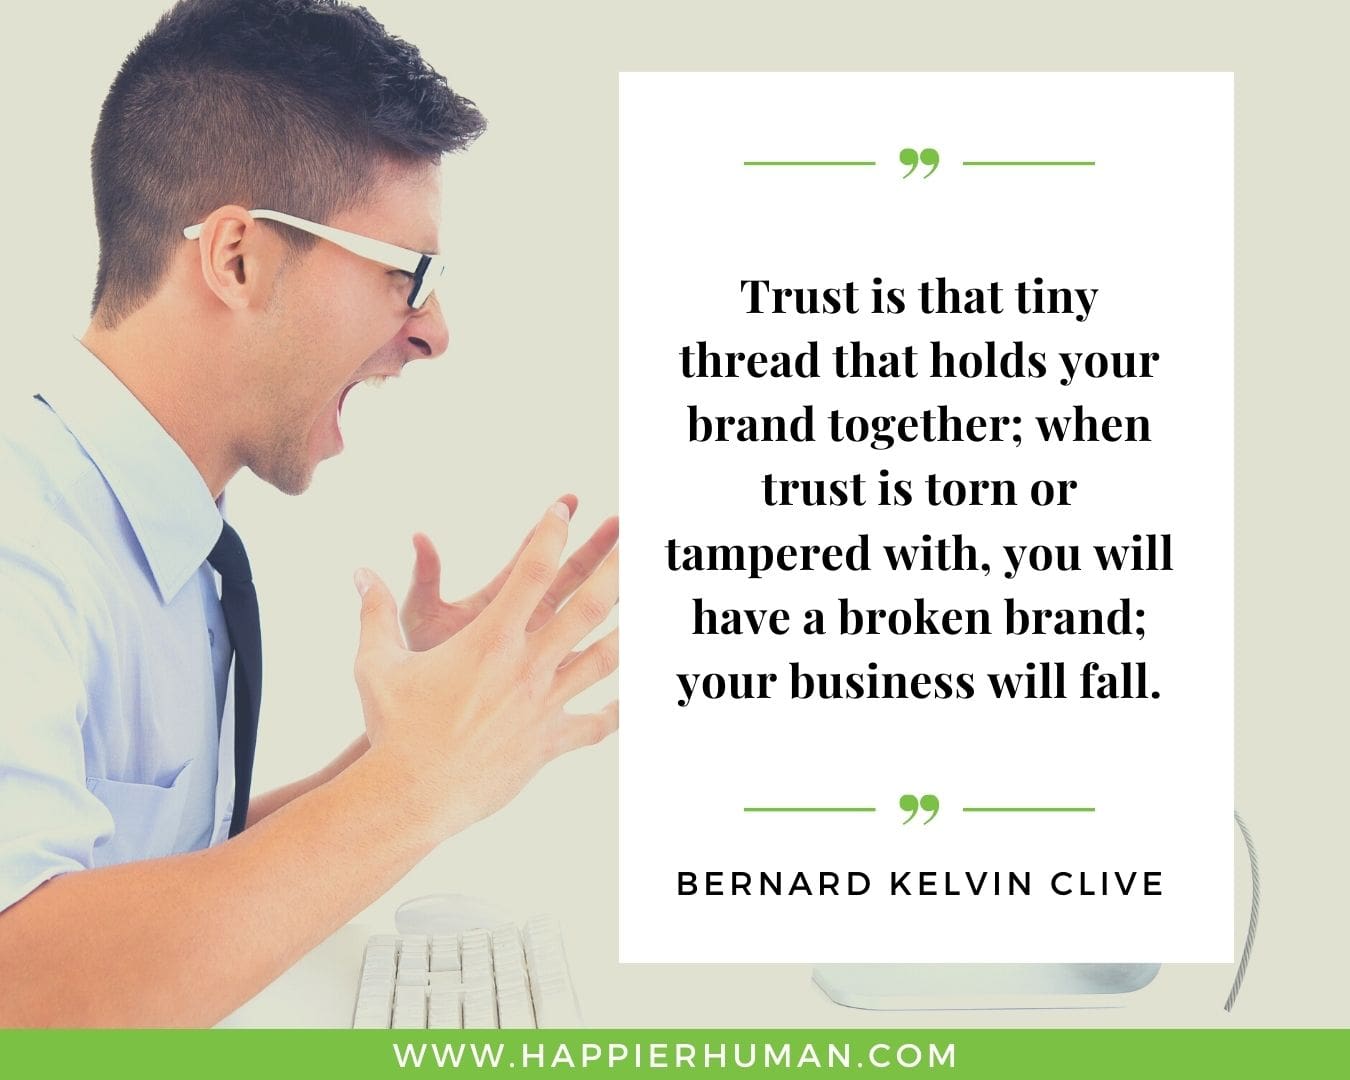 Broken Trust Quotes - “Trust is that tiny thread that holds your brand together; when trust is torn or tampered with, you will have a broken brand; your business will fall.” - Bernard Kelvin Clive